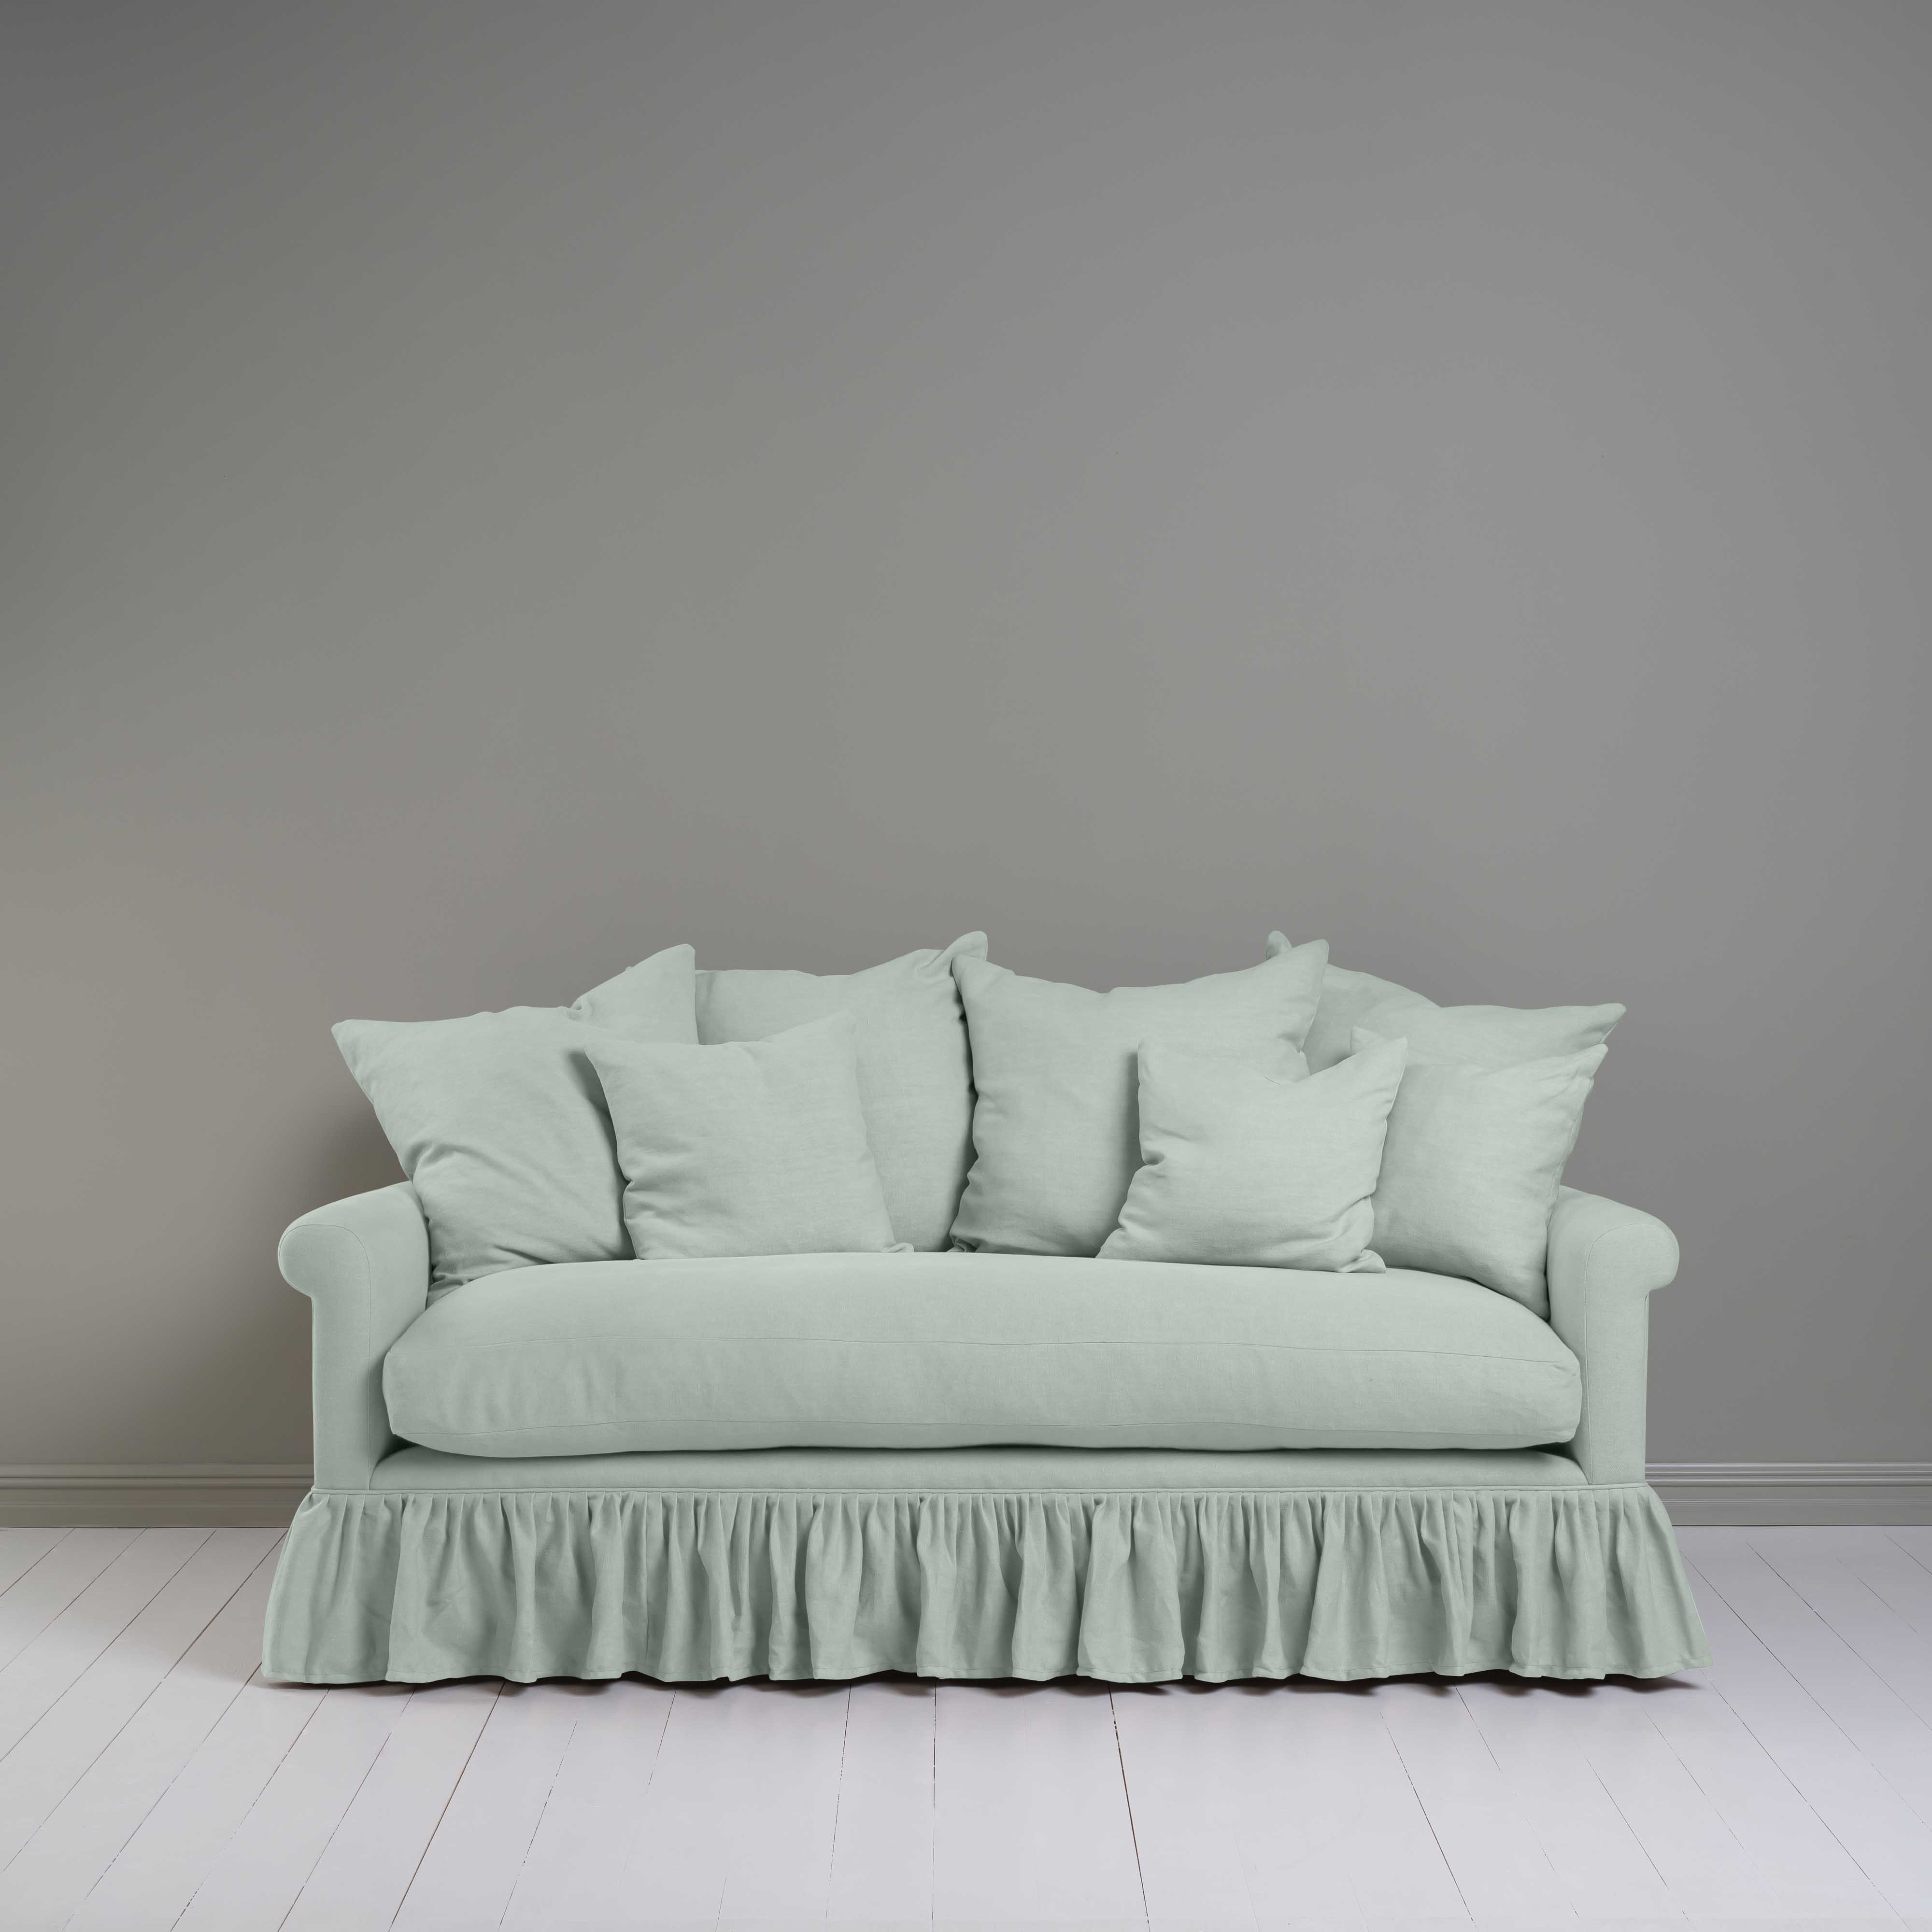  Curtain Call 3 Seater Sofa in Laidback Linen Sky 